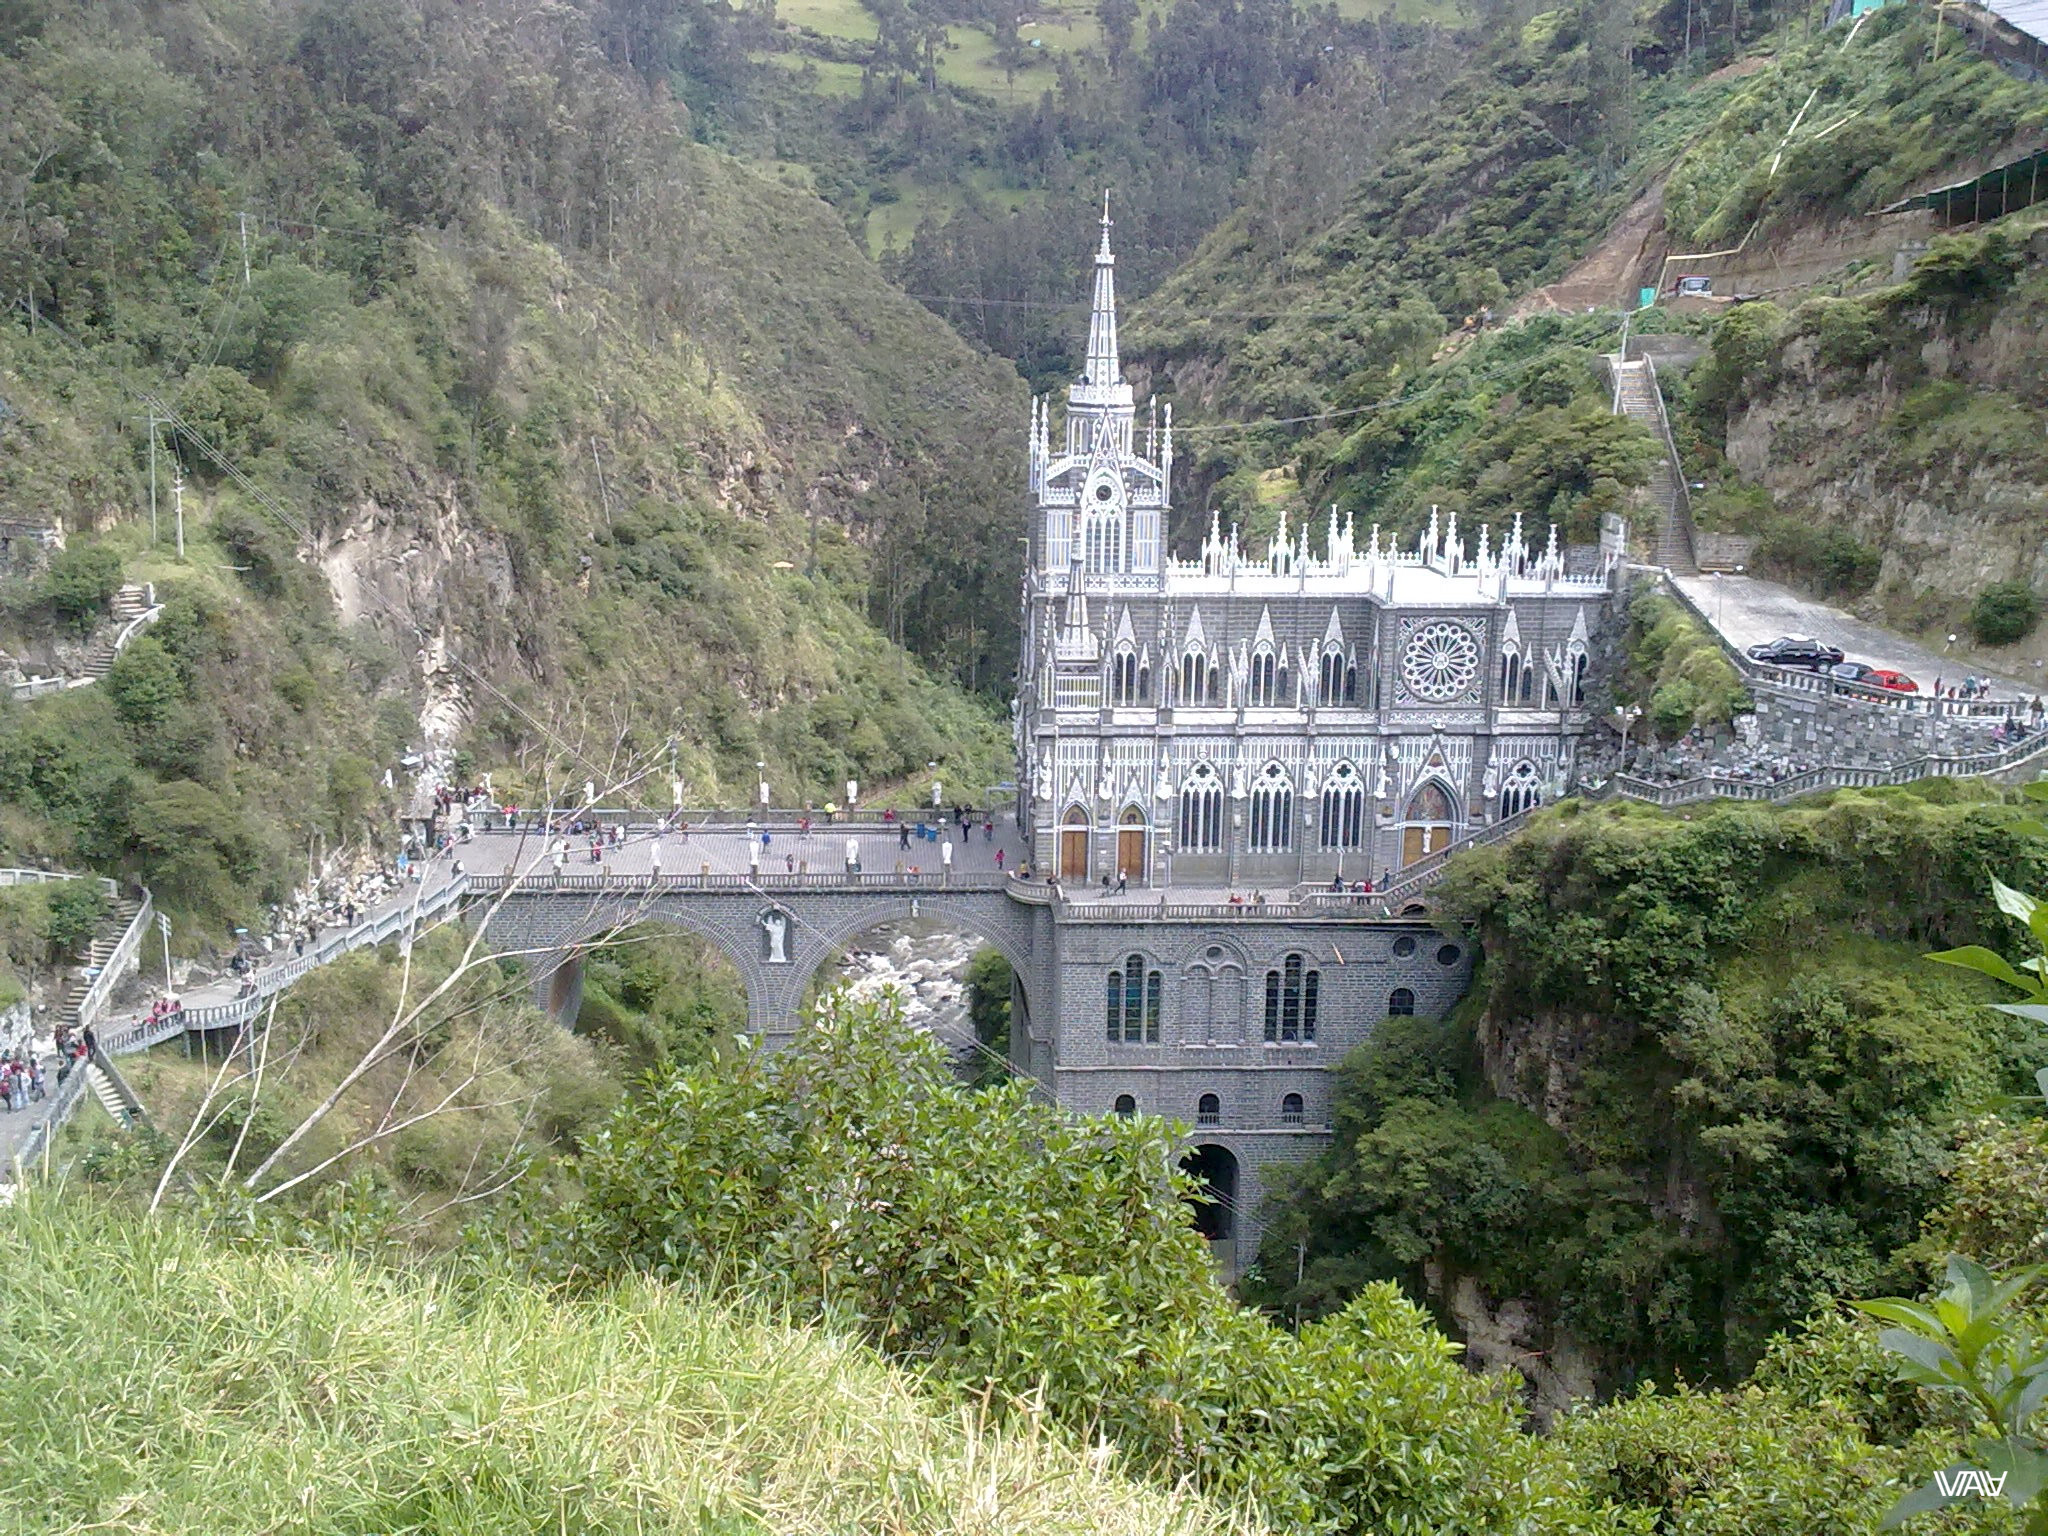 View of Santuario De Las Lajas from the hill in front of it. Ipiales, Colombia